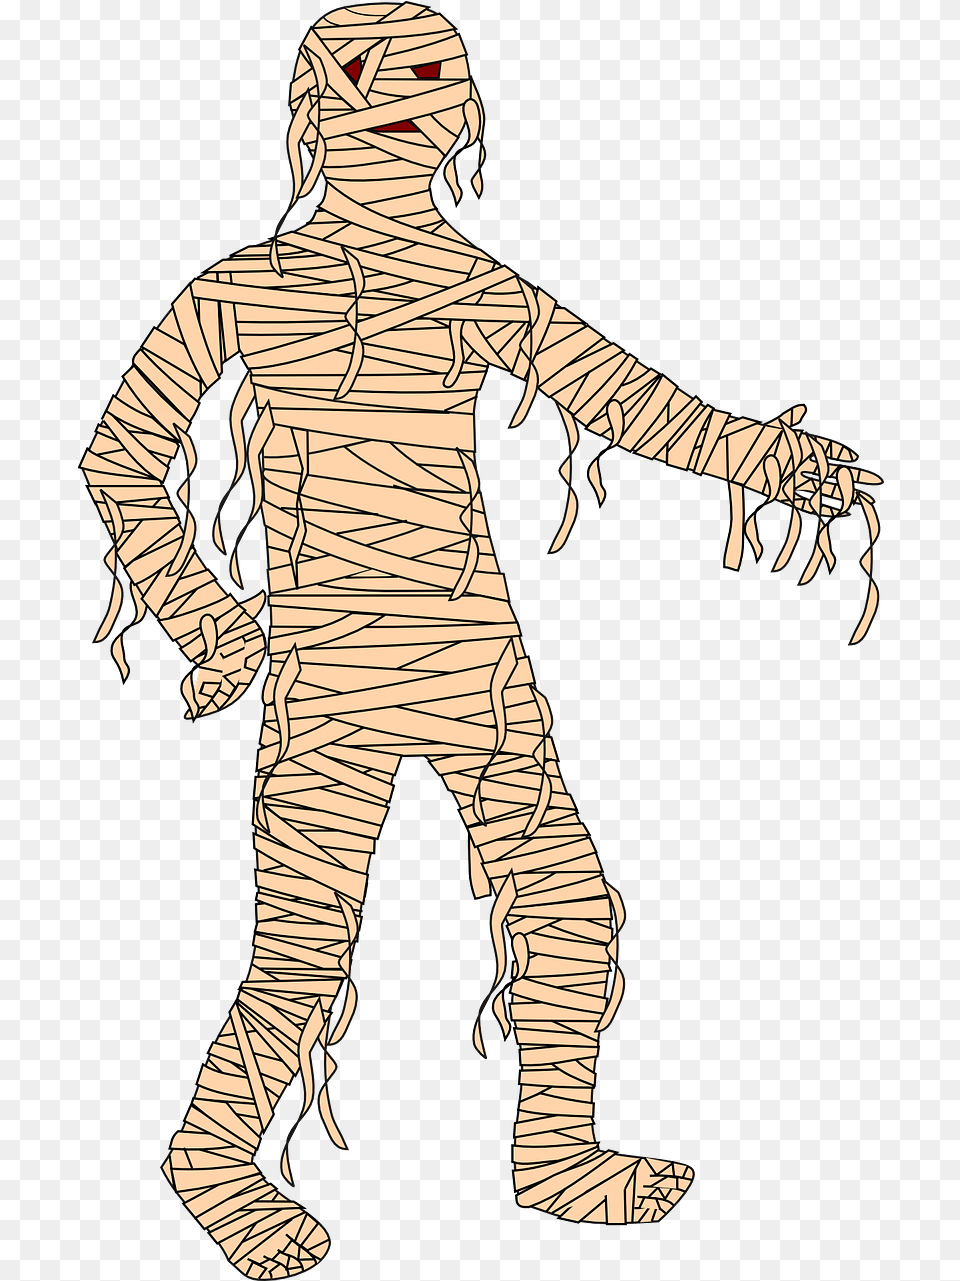 Mummy Cartoon Halloween Free Vector Graphic On Pixabay Egyptian Mummy For Kids, Adult, Male, Man, Person Png